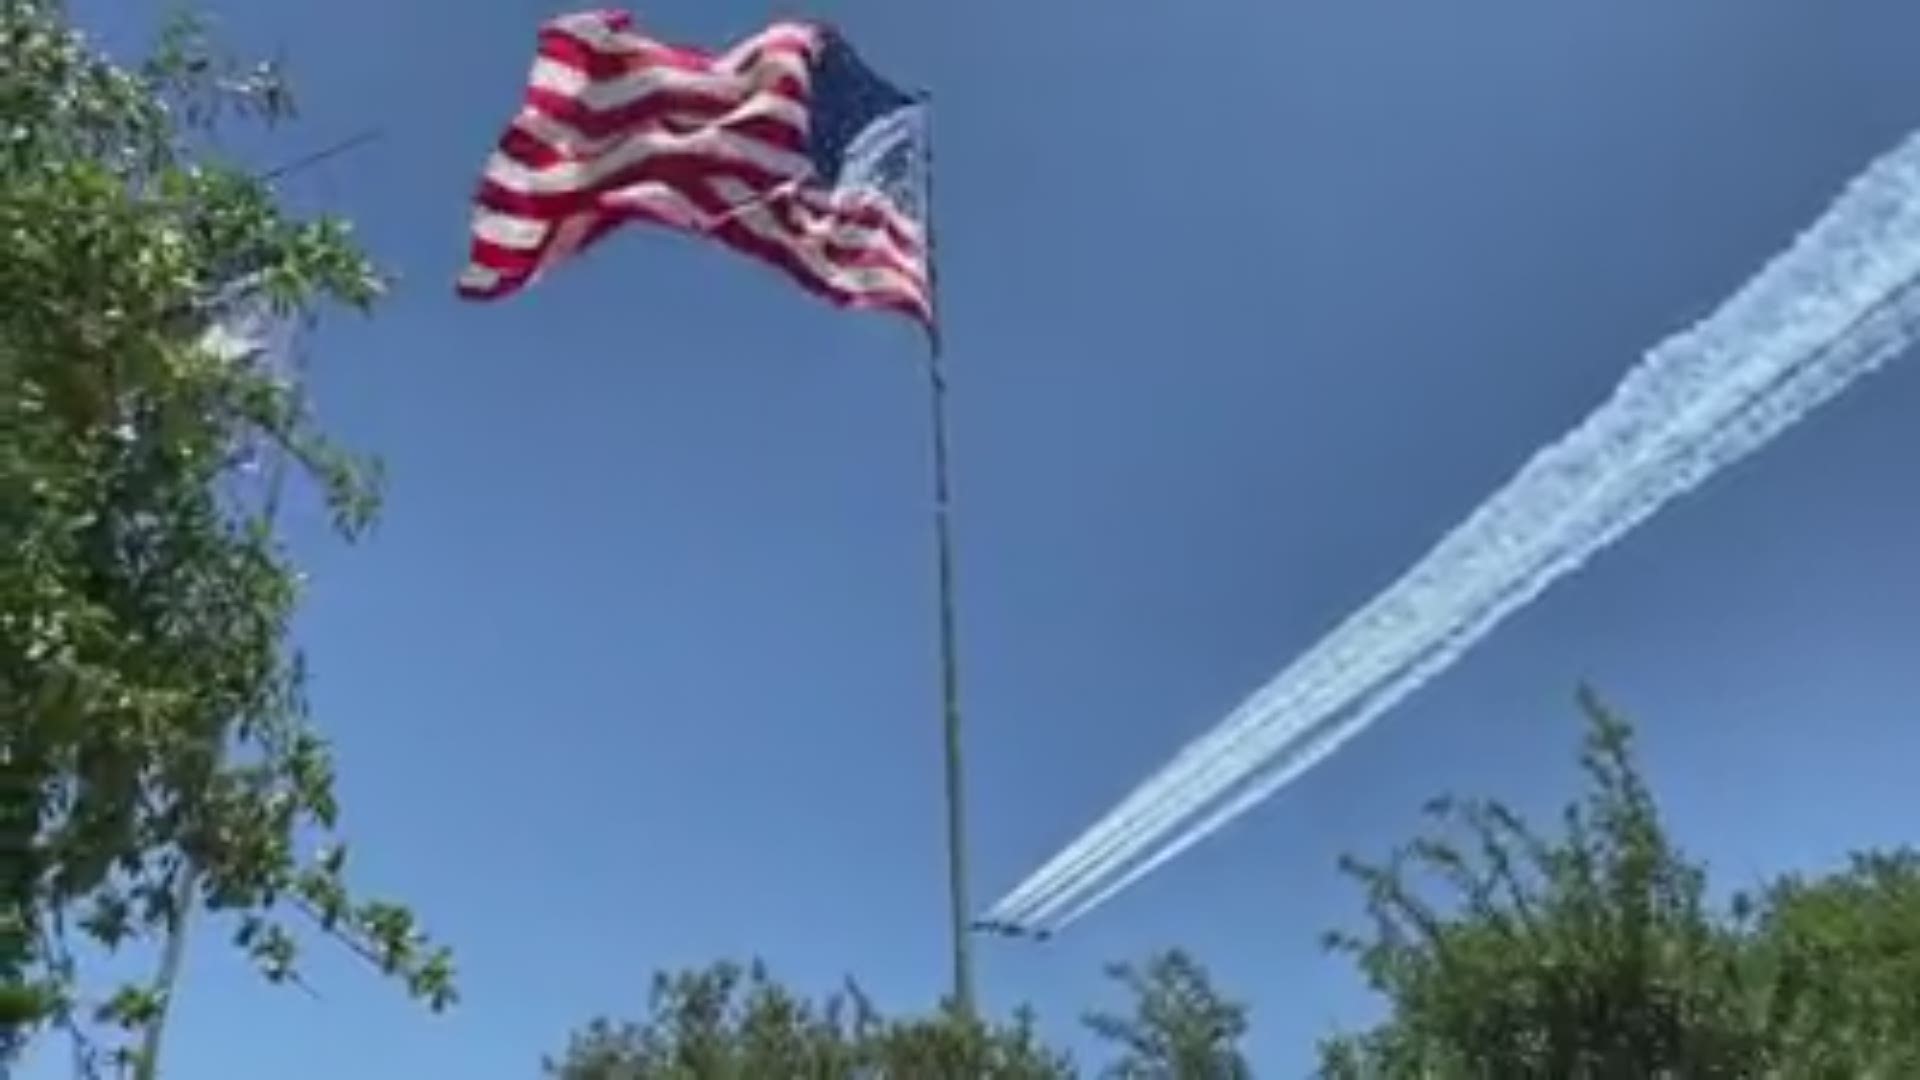 Fred Wilkins captured this picture-perfect video of the Blue Angels' flyover in the Taste of Texas parking lot -- and with it a great shot of the American flag.